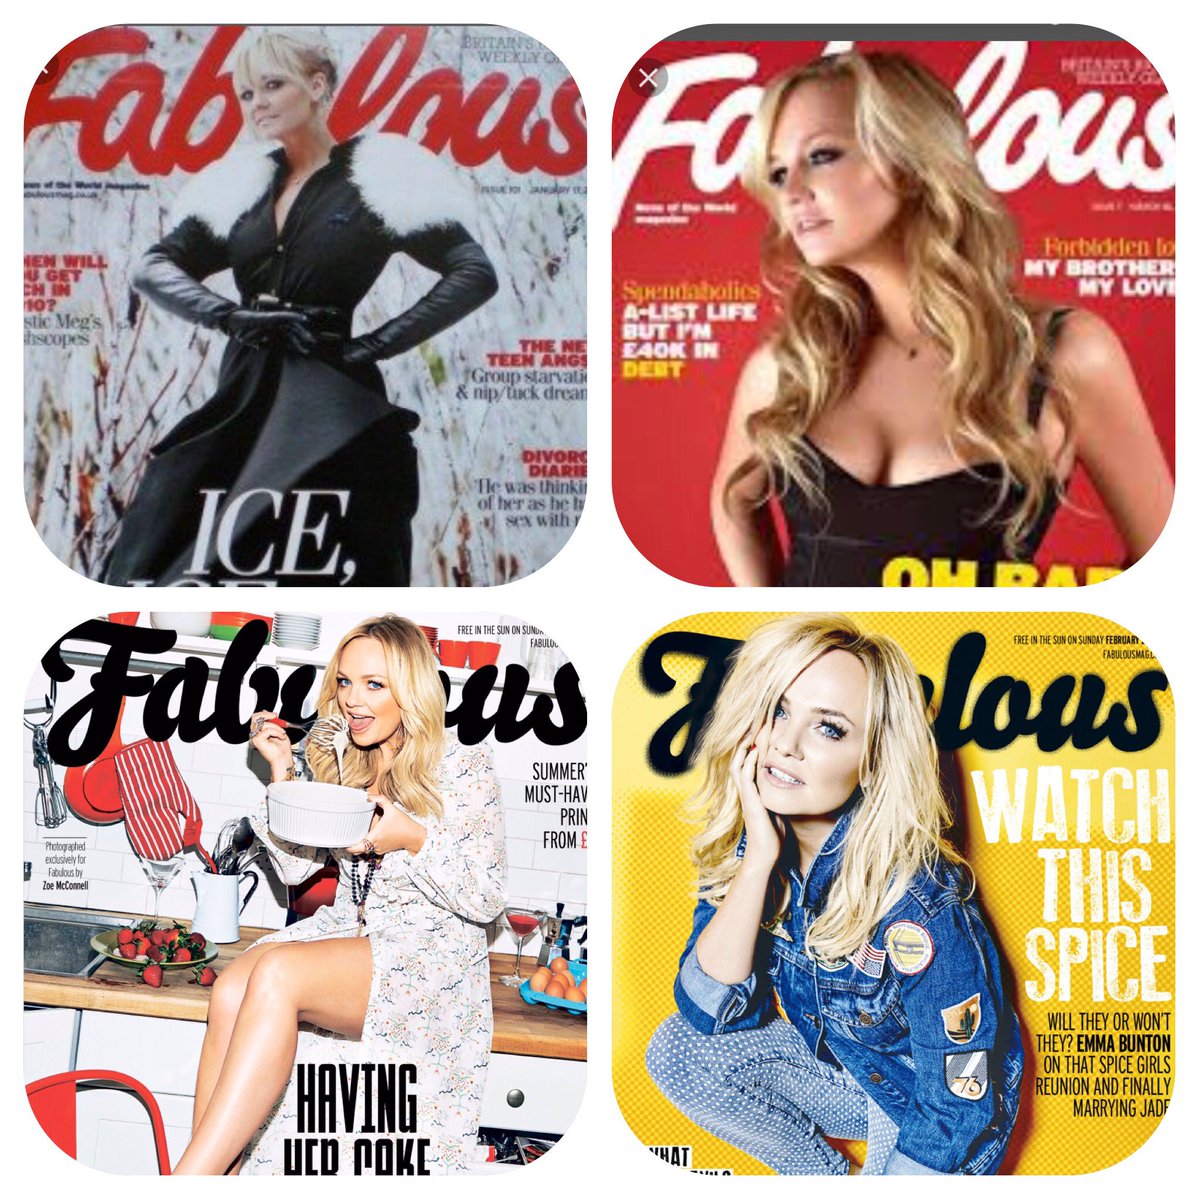 Happy 10th anniversary @Fabulousmag ❤️working with you!!!!! https://t.co/qPtRxbV1nh